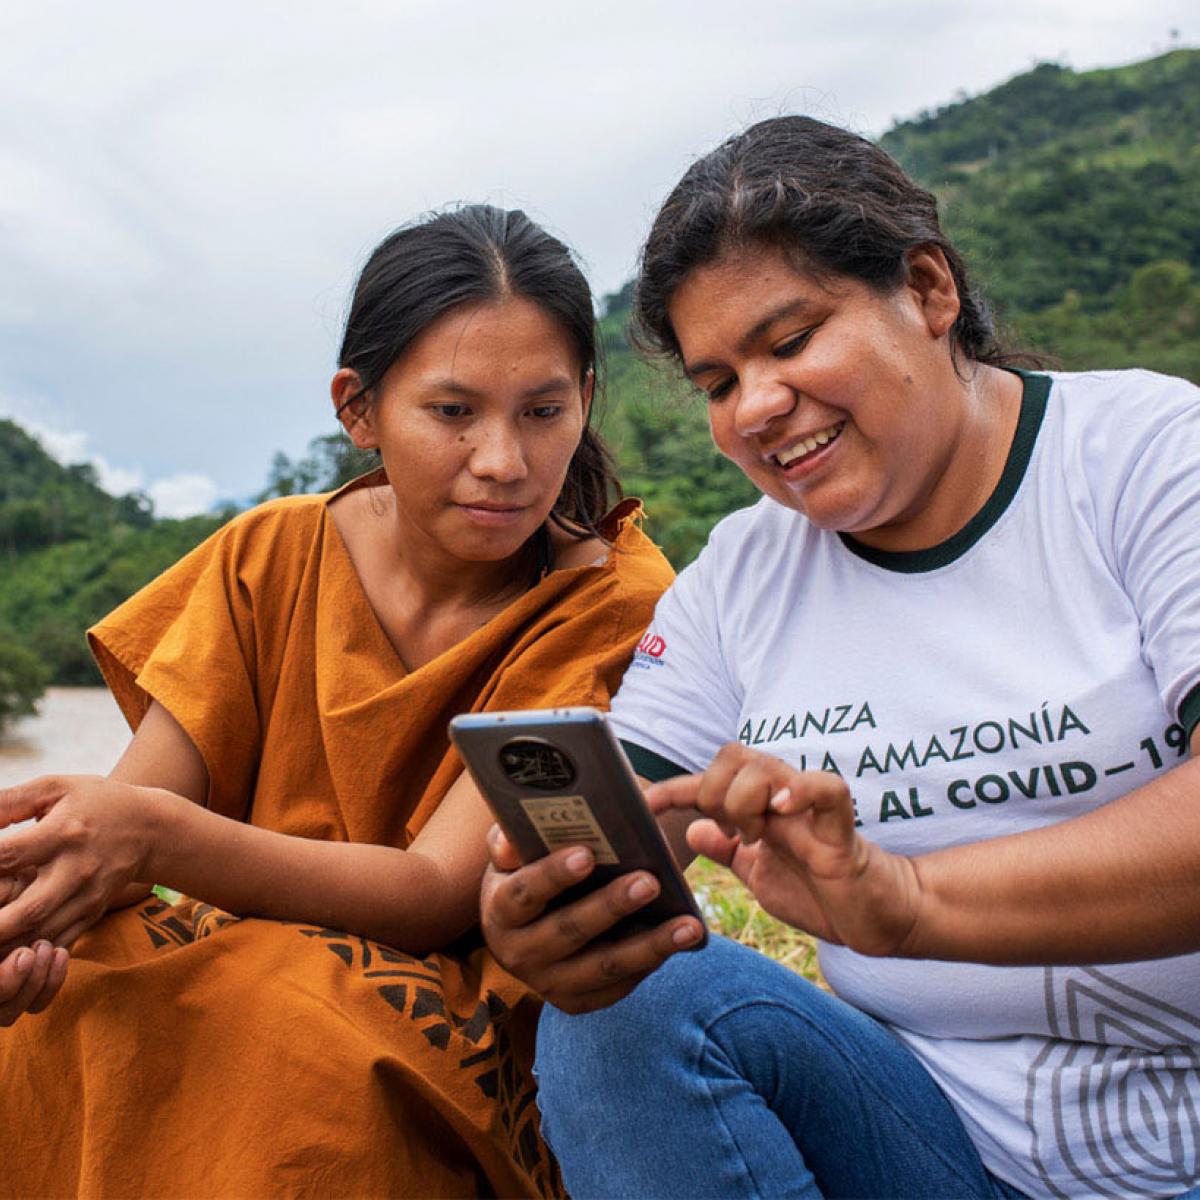 One of the project's professionals teaching an indigenous young woman how to use an app on a cellphone in the Amazon rainforest